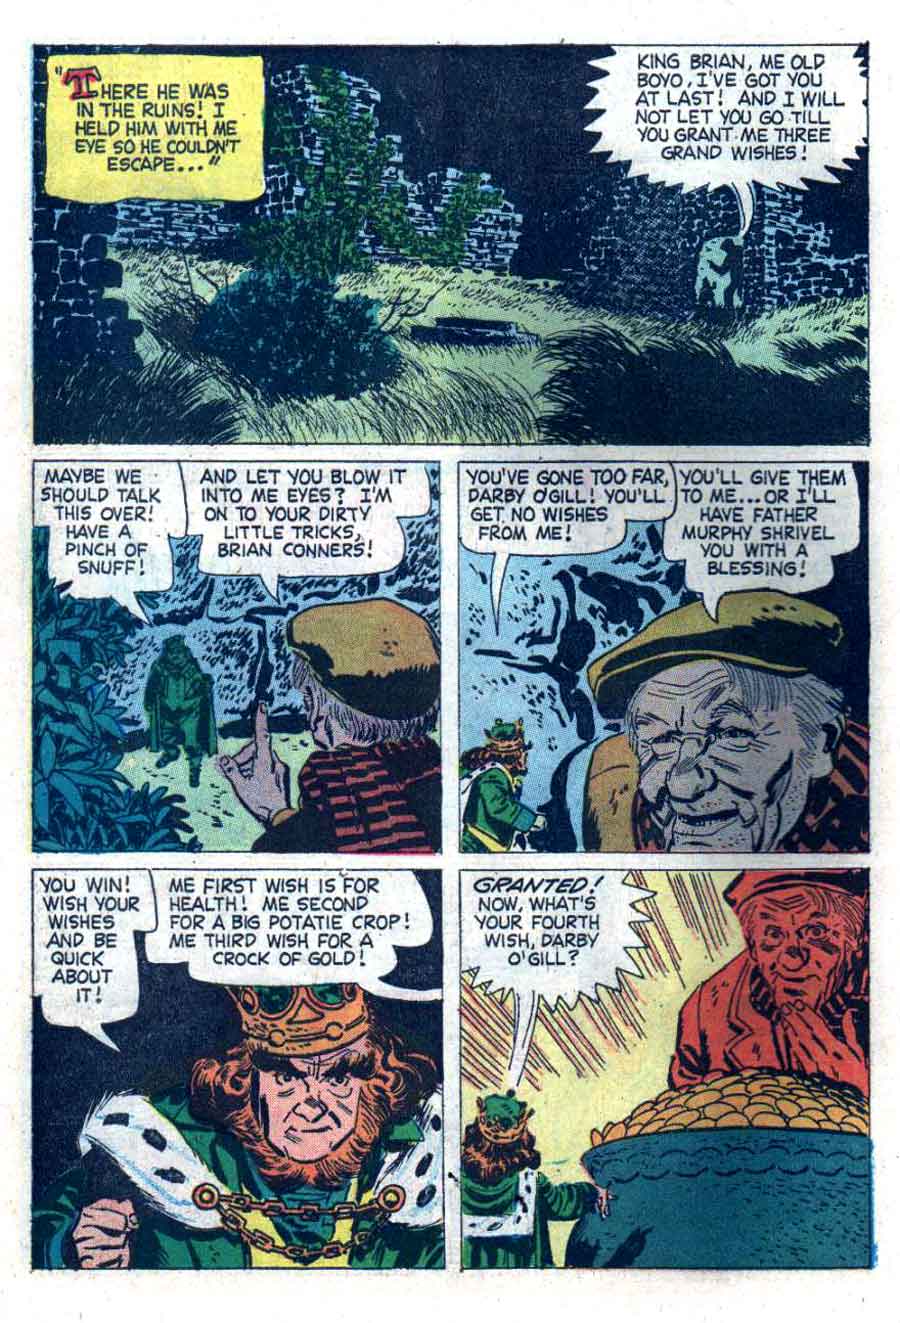 Darby O' Gill and the Little People / Four Color Comics #1024 dell comic book page art by Alex Toth